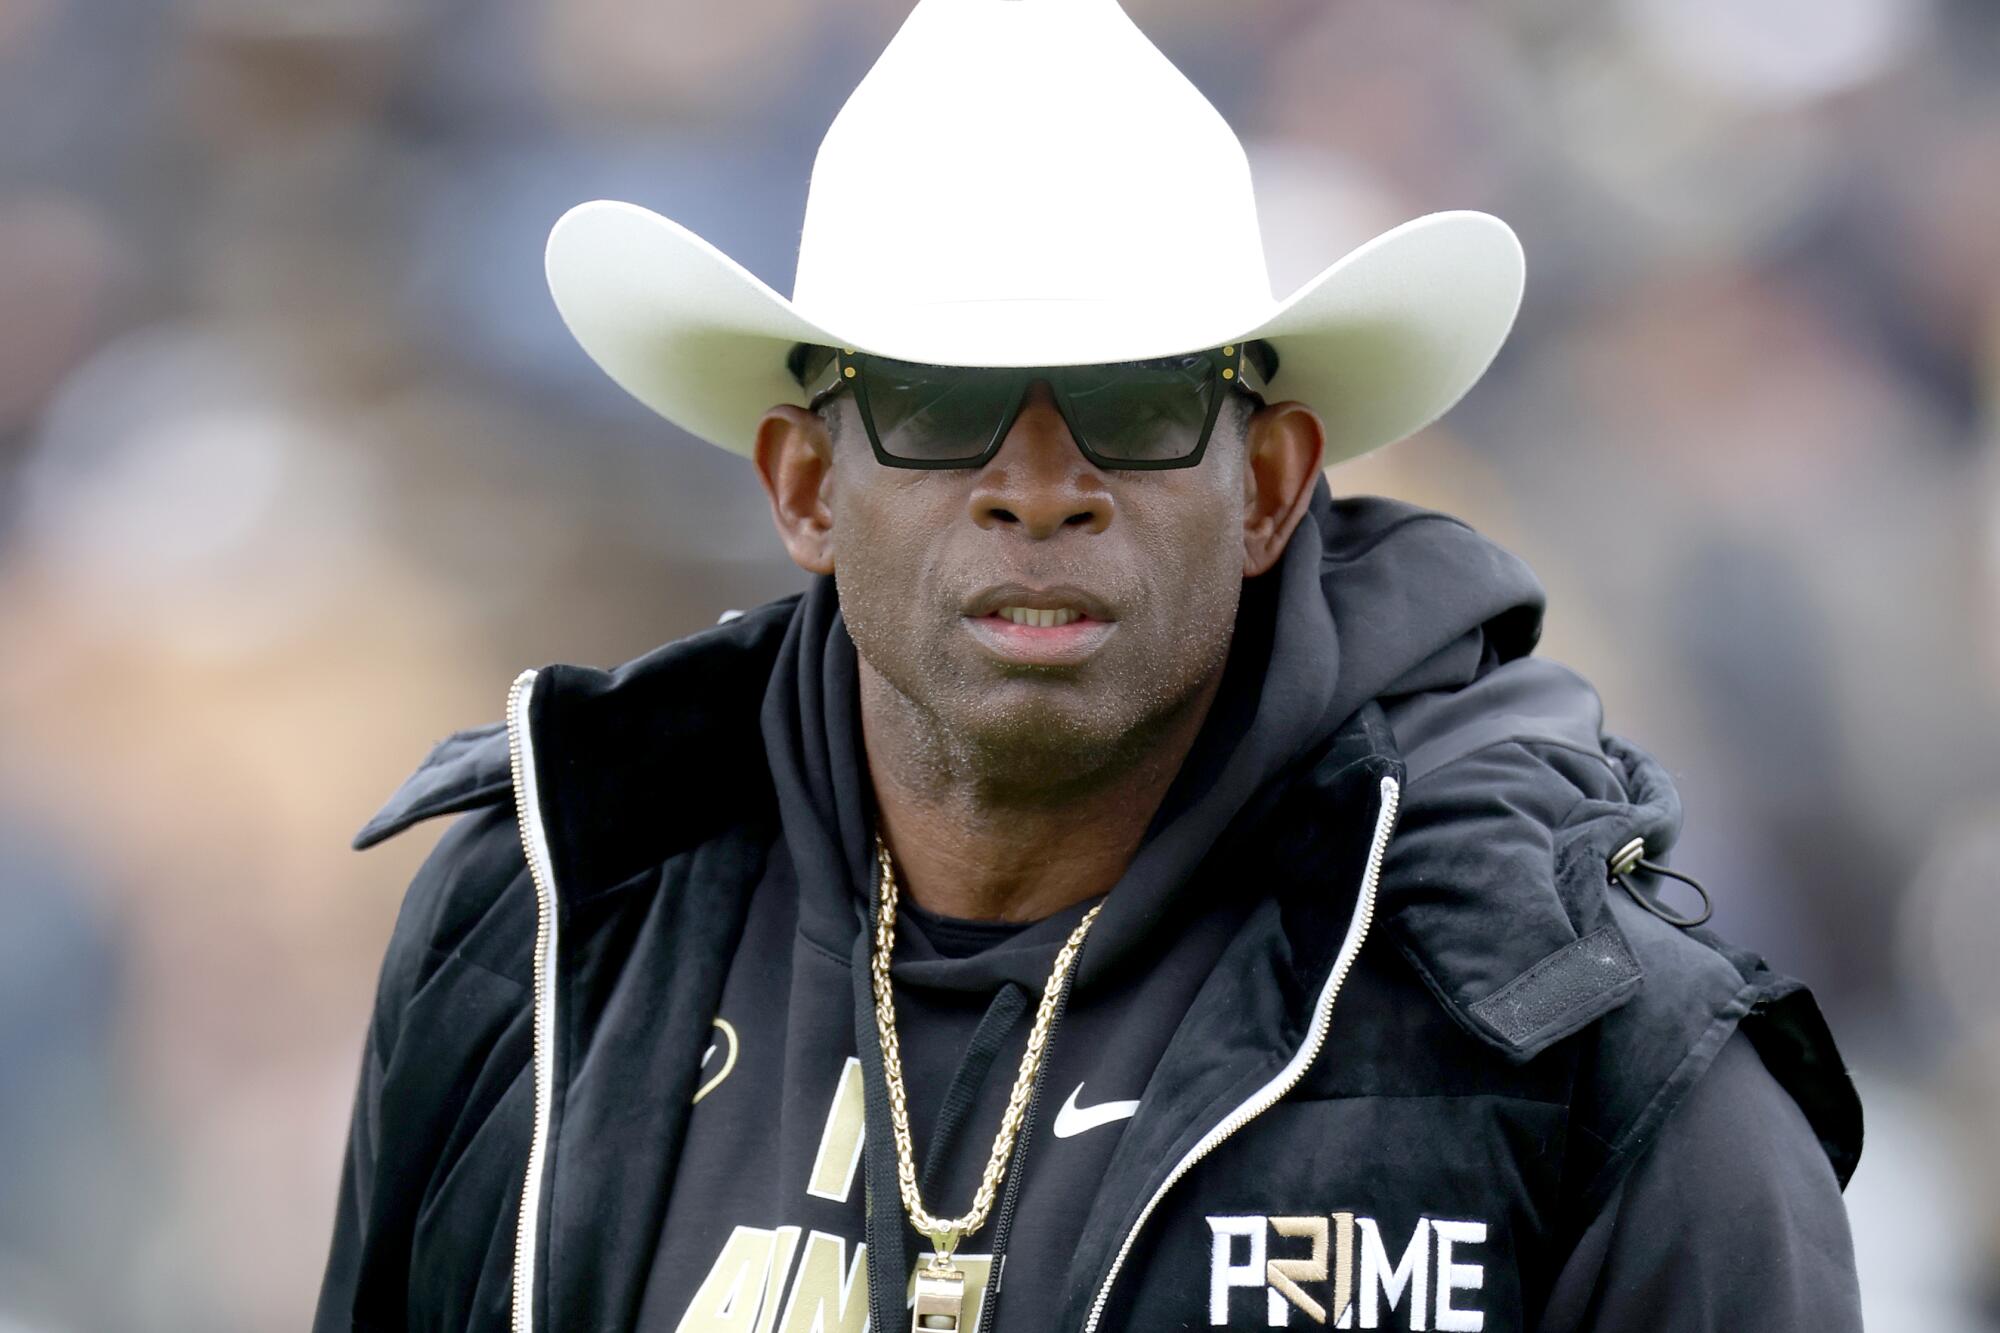 Deion Sanders is all about himself, but he could help others